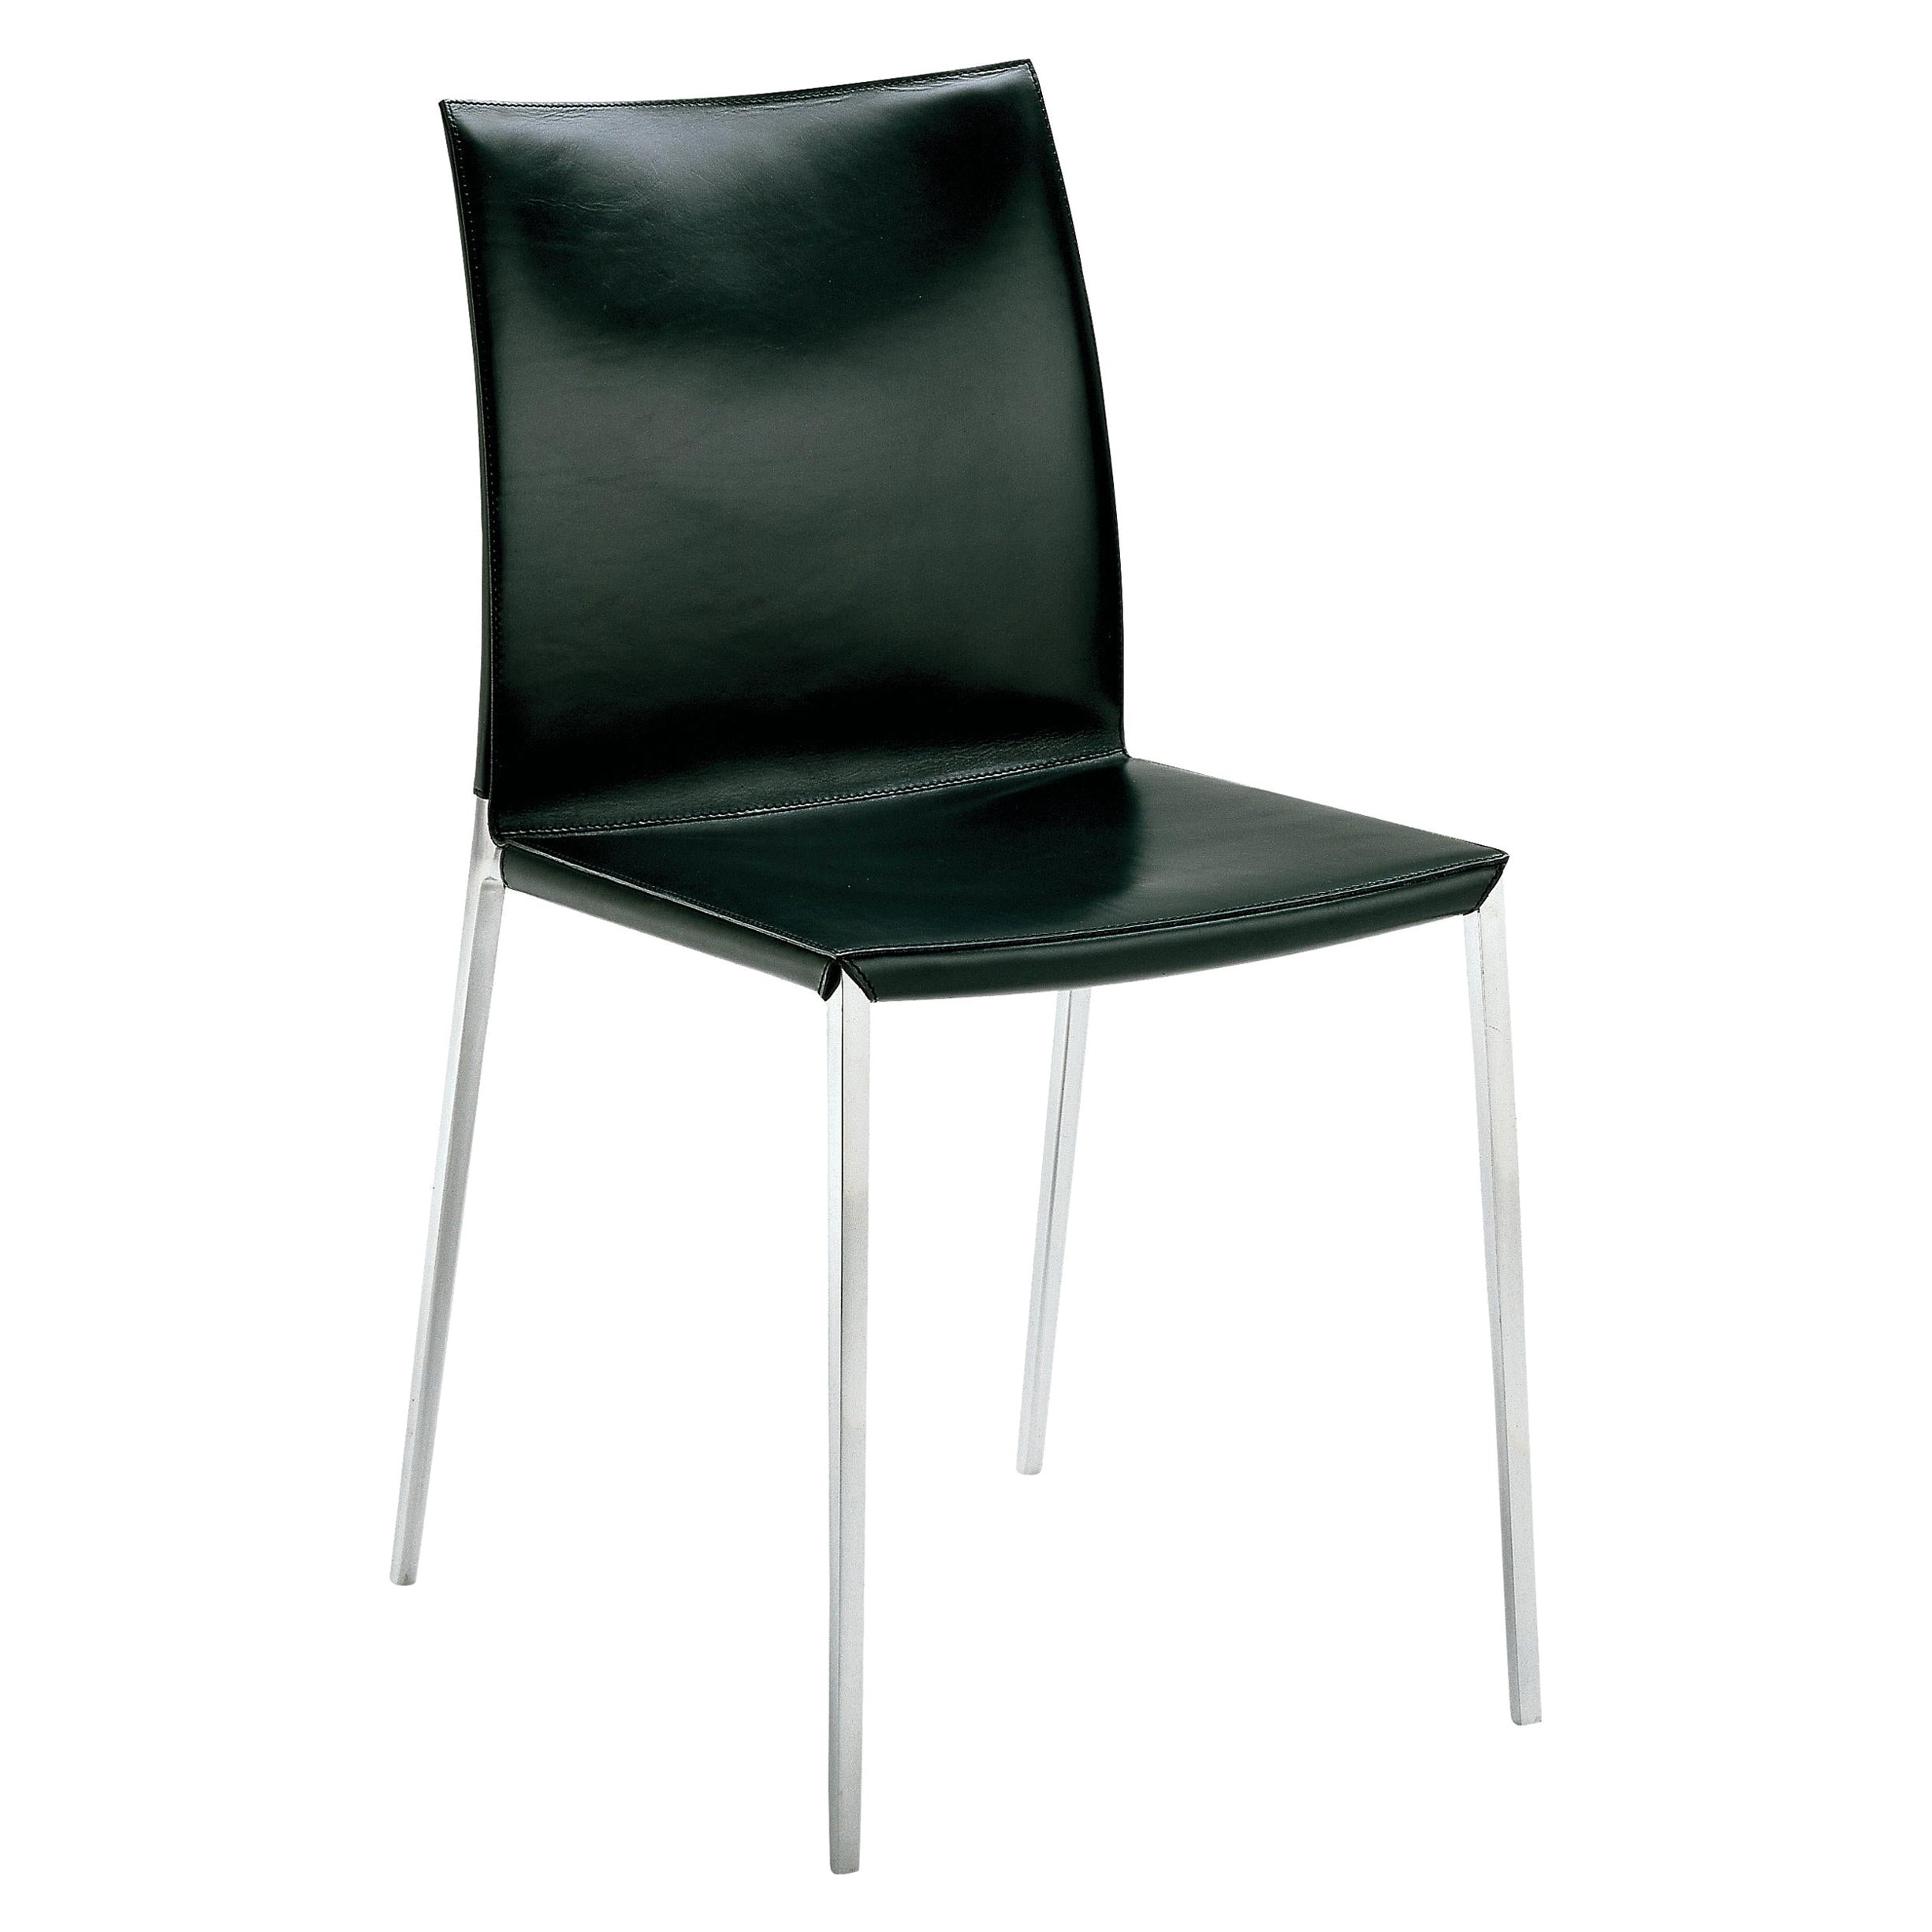 Zanotta Lia Chair in Black Upholstery with Polished Aluminum Frame